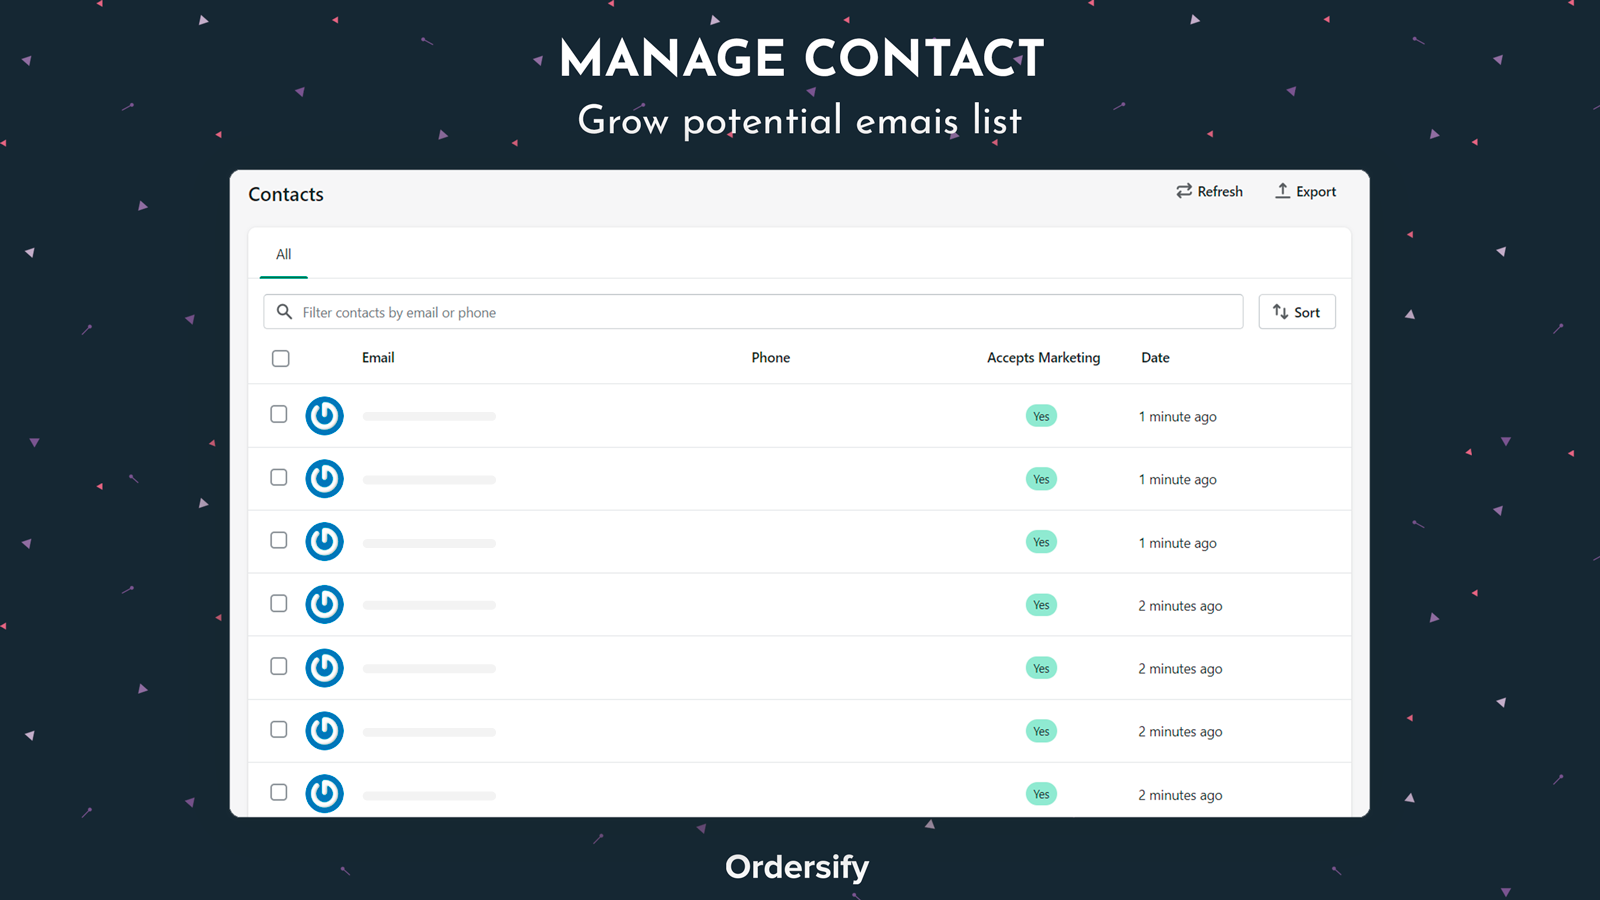 Manage contact